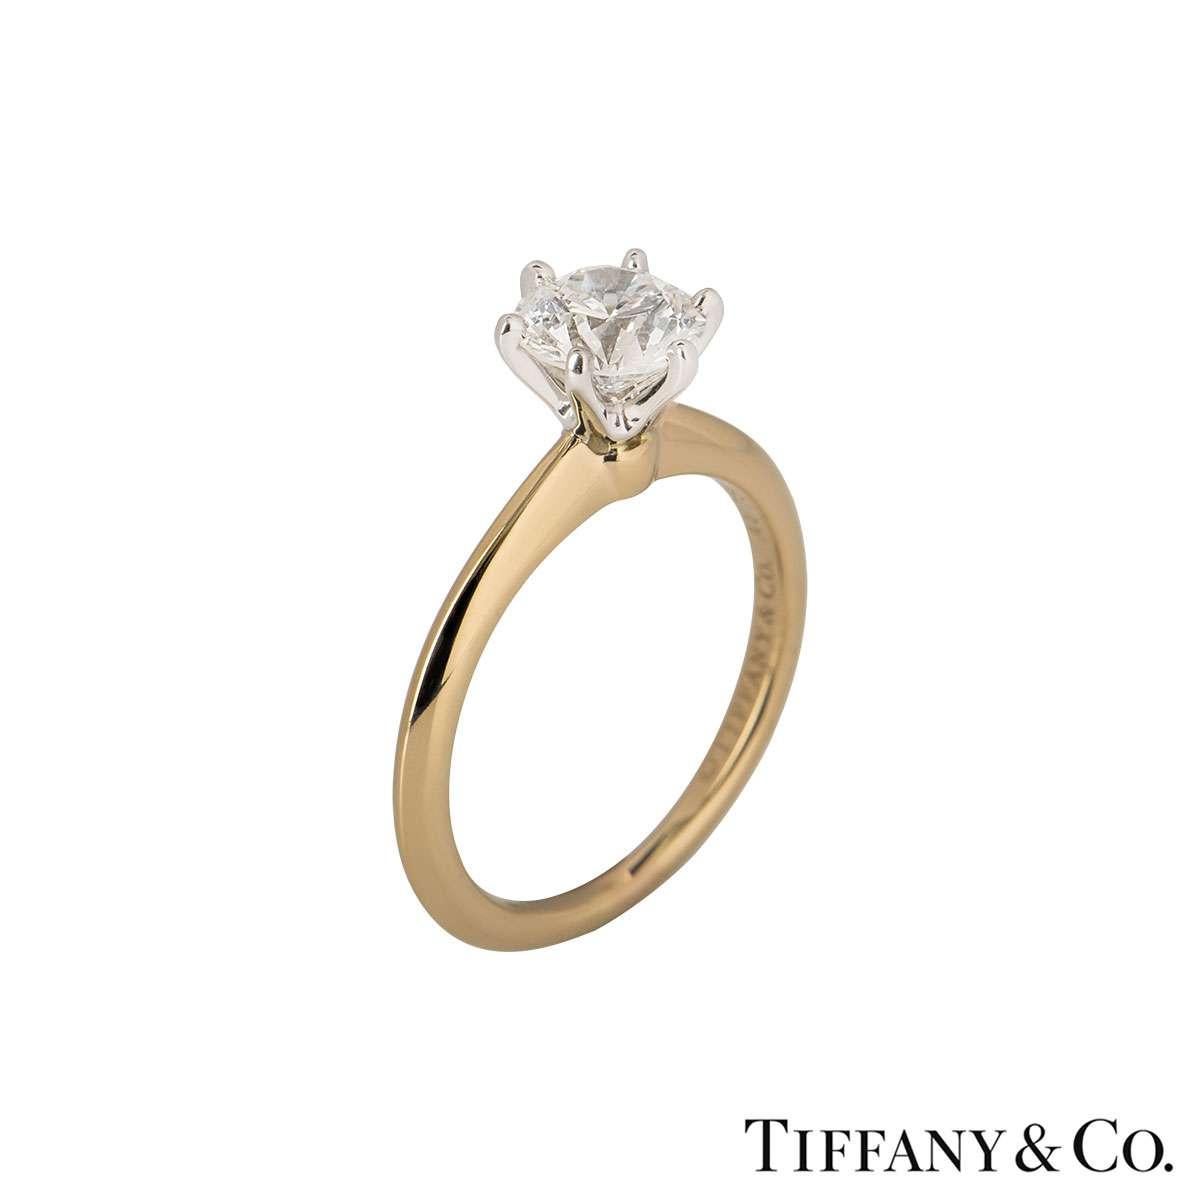 A stunning 18k rose gold diamond engagement ring by Tiffany & Co. from the Setting collection. The ring comprises of a round brilliant cut diamond in a 6 claw platinum setting with a weight of 0.95ct, H colour and VS1 clarity. The diamond scores an